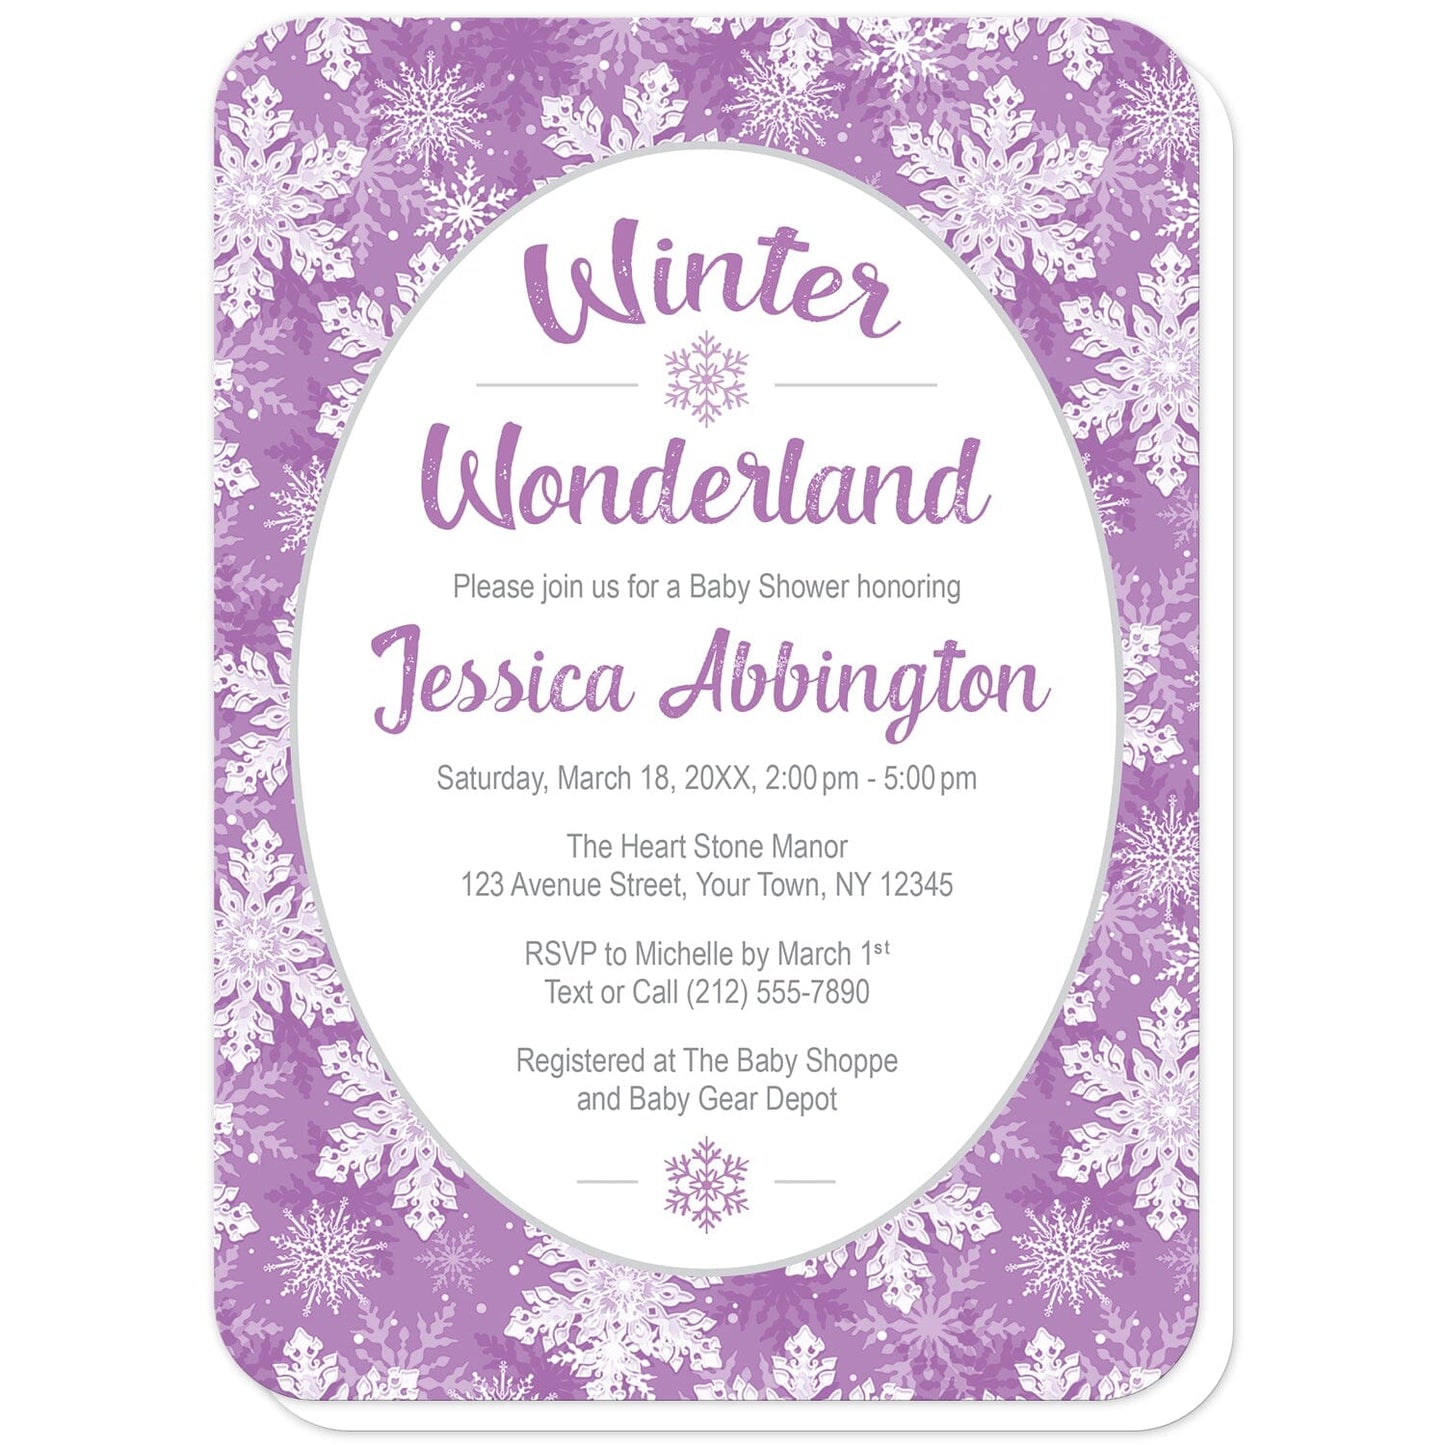 Purple Snowflake Winter Wonderland Baby Shower Invitations (with rounded corners) at Artistically Invited. Pretty purple snowflake Winter Wonderland baby shower invitations with your personalized baby shower celebration details custom printed in purple and gray in a white oval frame design over a beautiful and ornate purple and white snowflake pattern background.